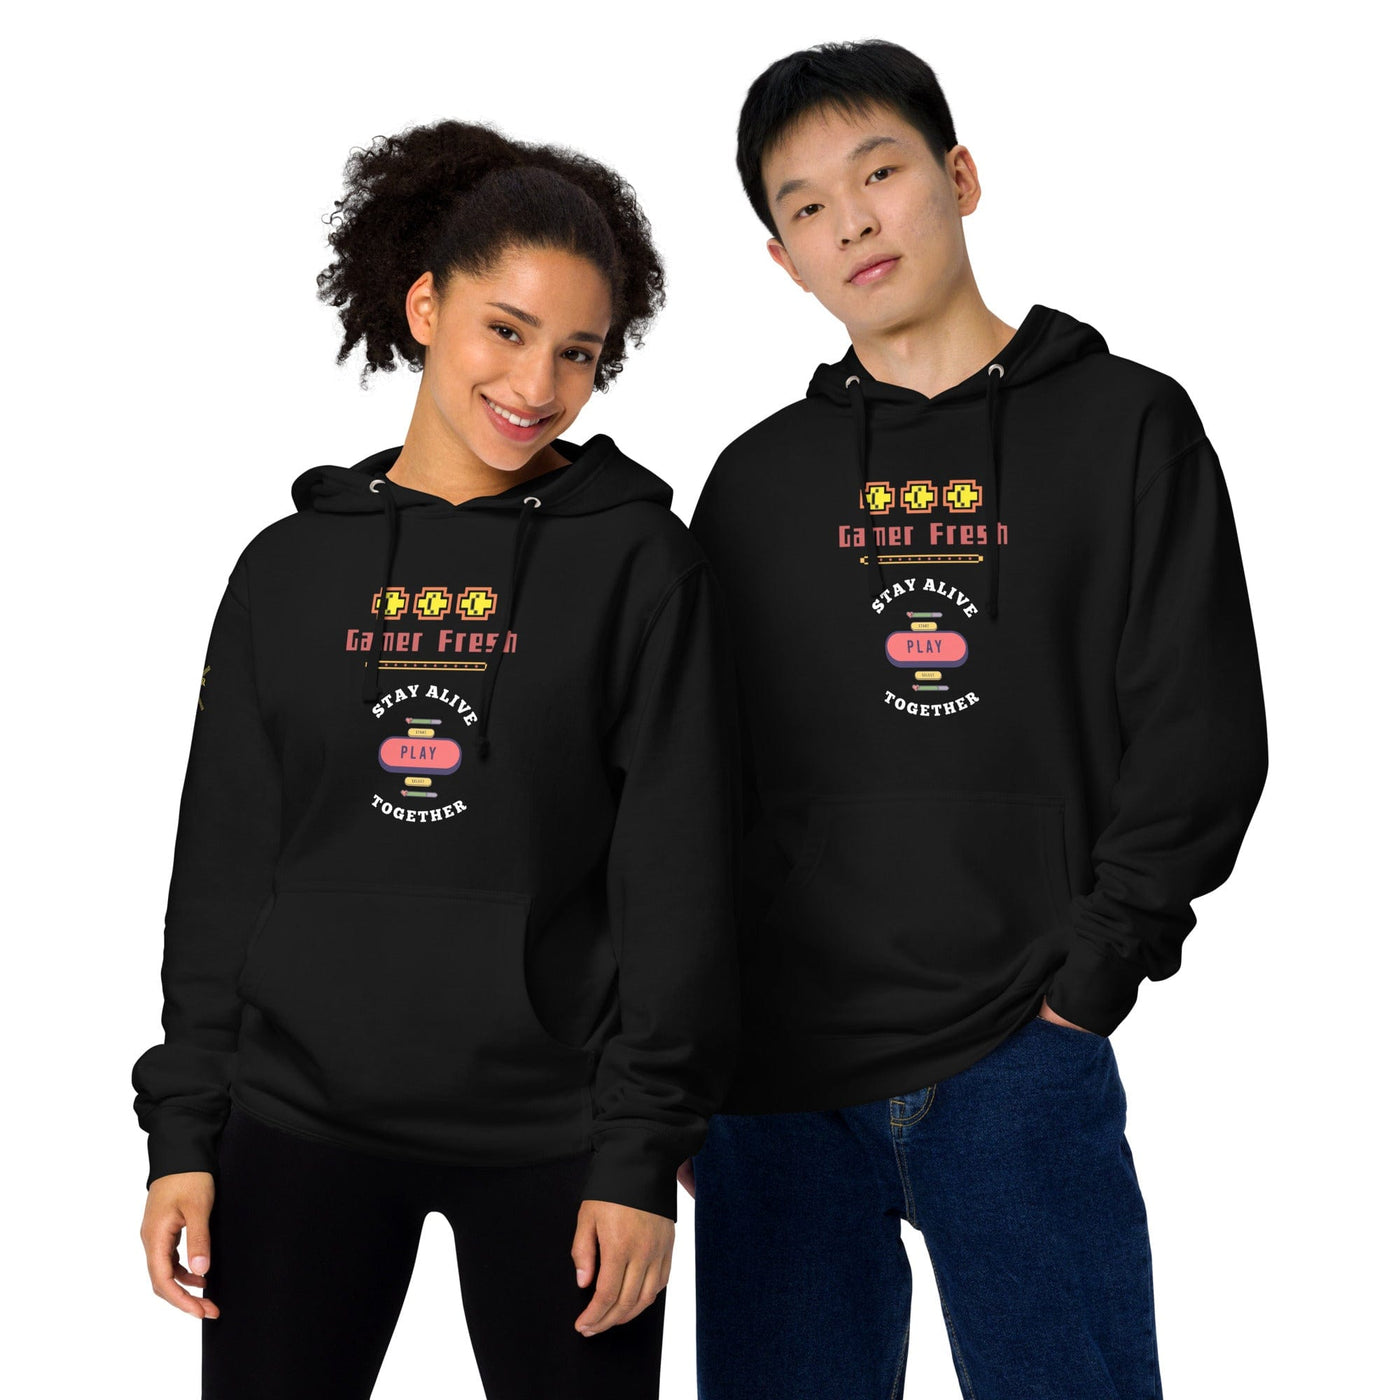 Gamer Fresh | Stay Alive Coin Drop | Play Together | Gamer Unisex Midweight Hoodie